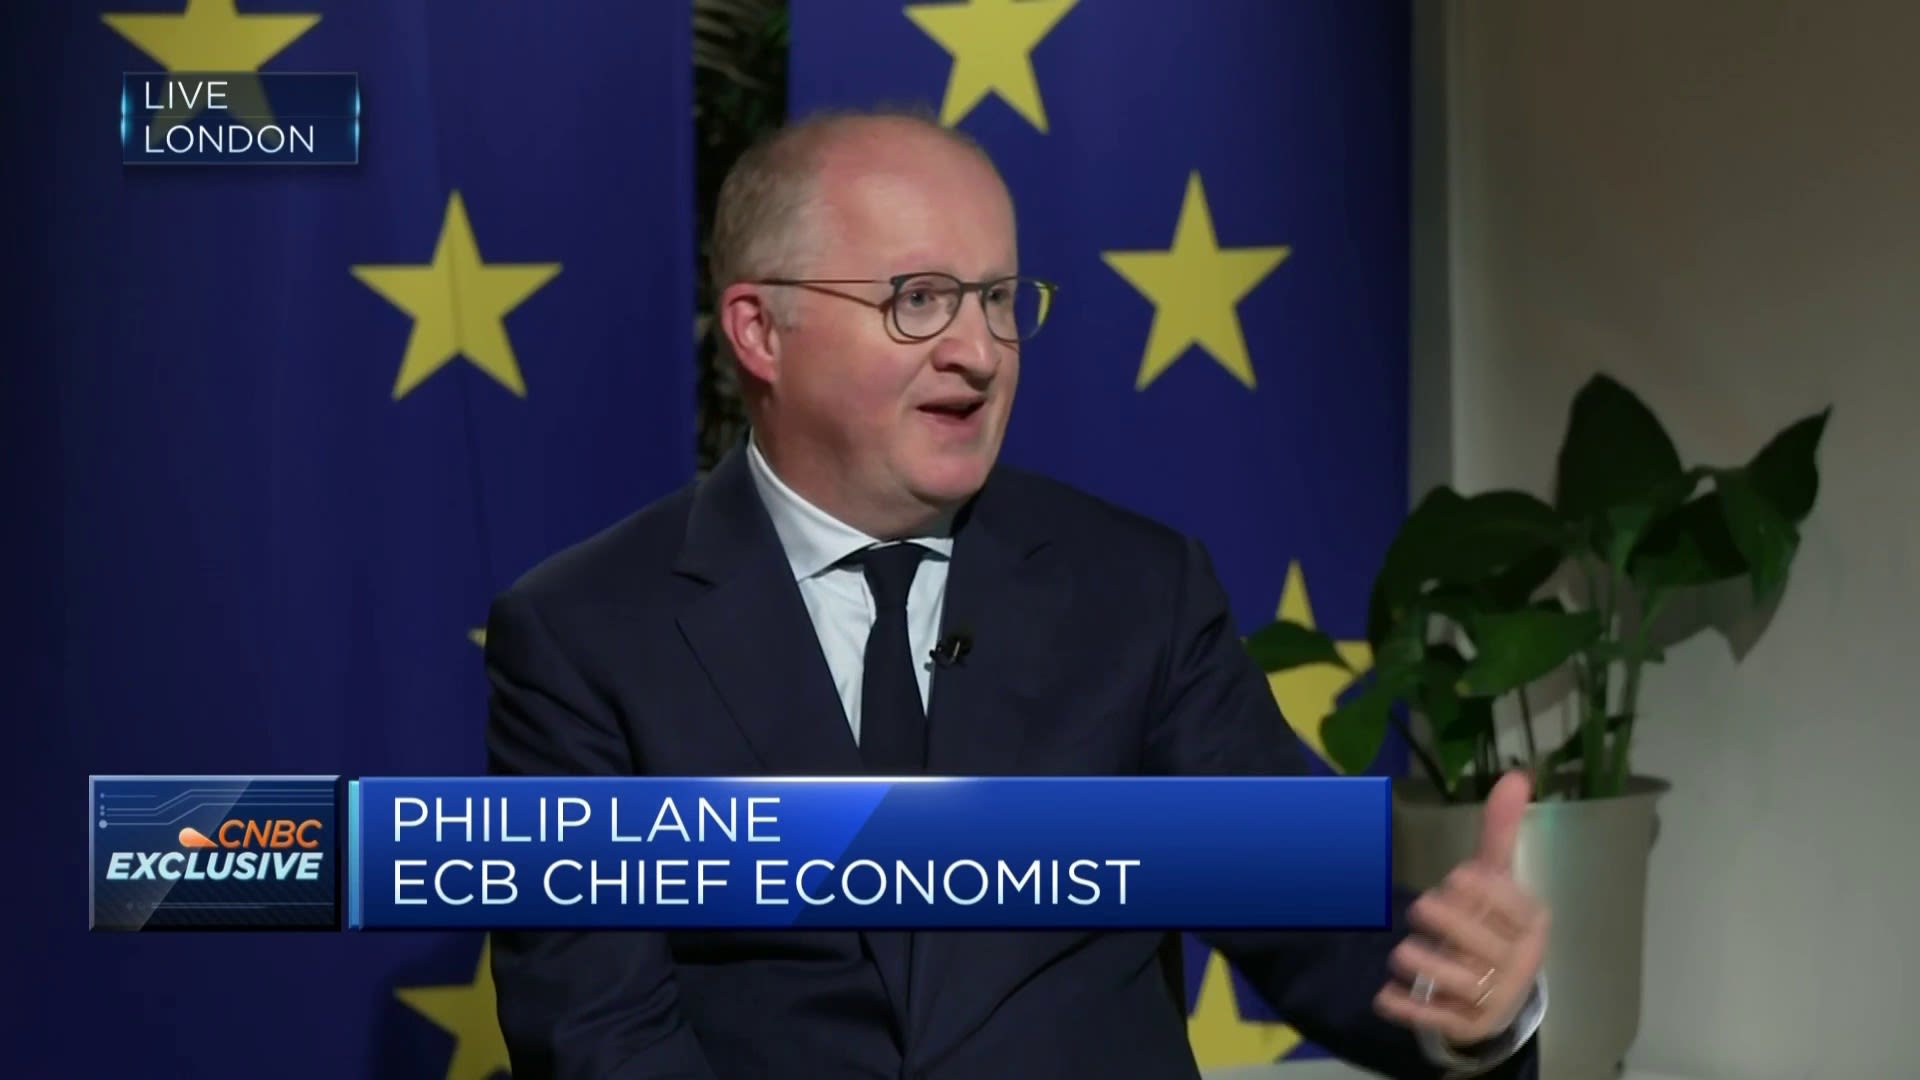 Watch's CNBC's full interview with ECB Chief Economist Philip Lane